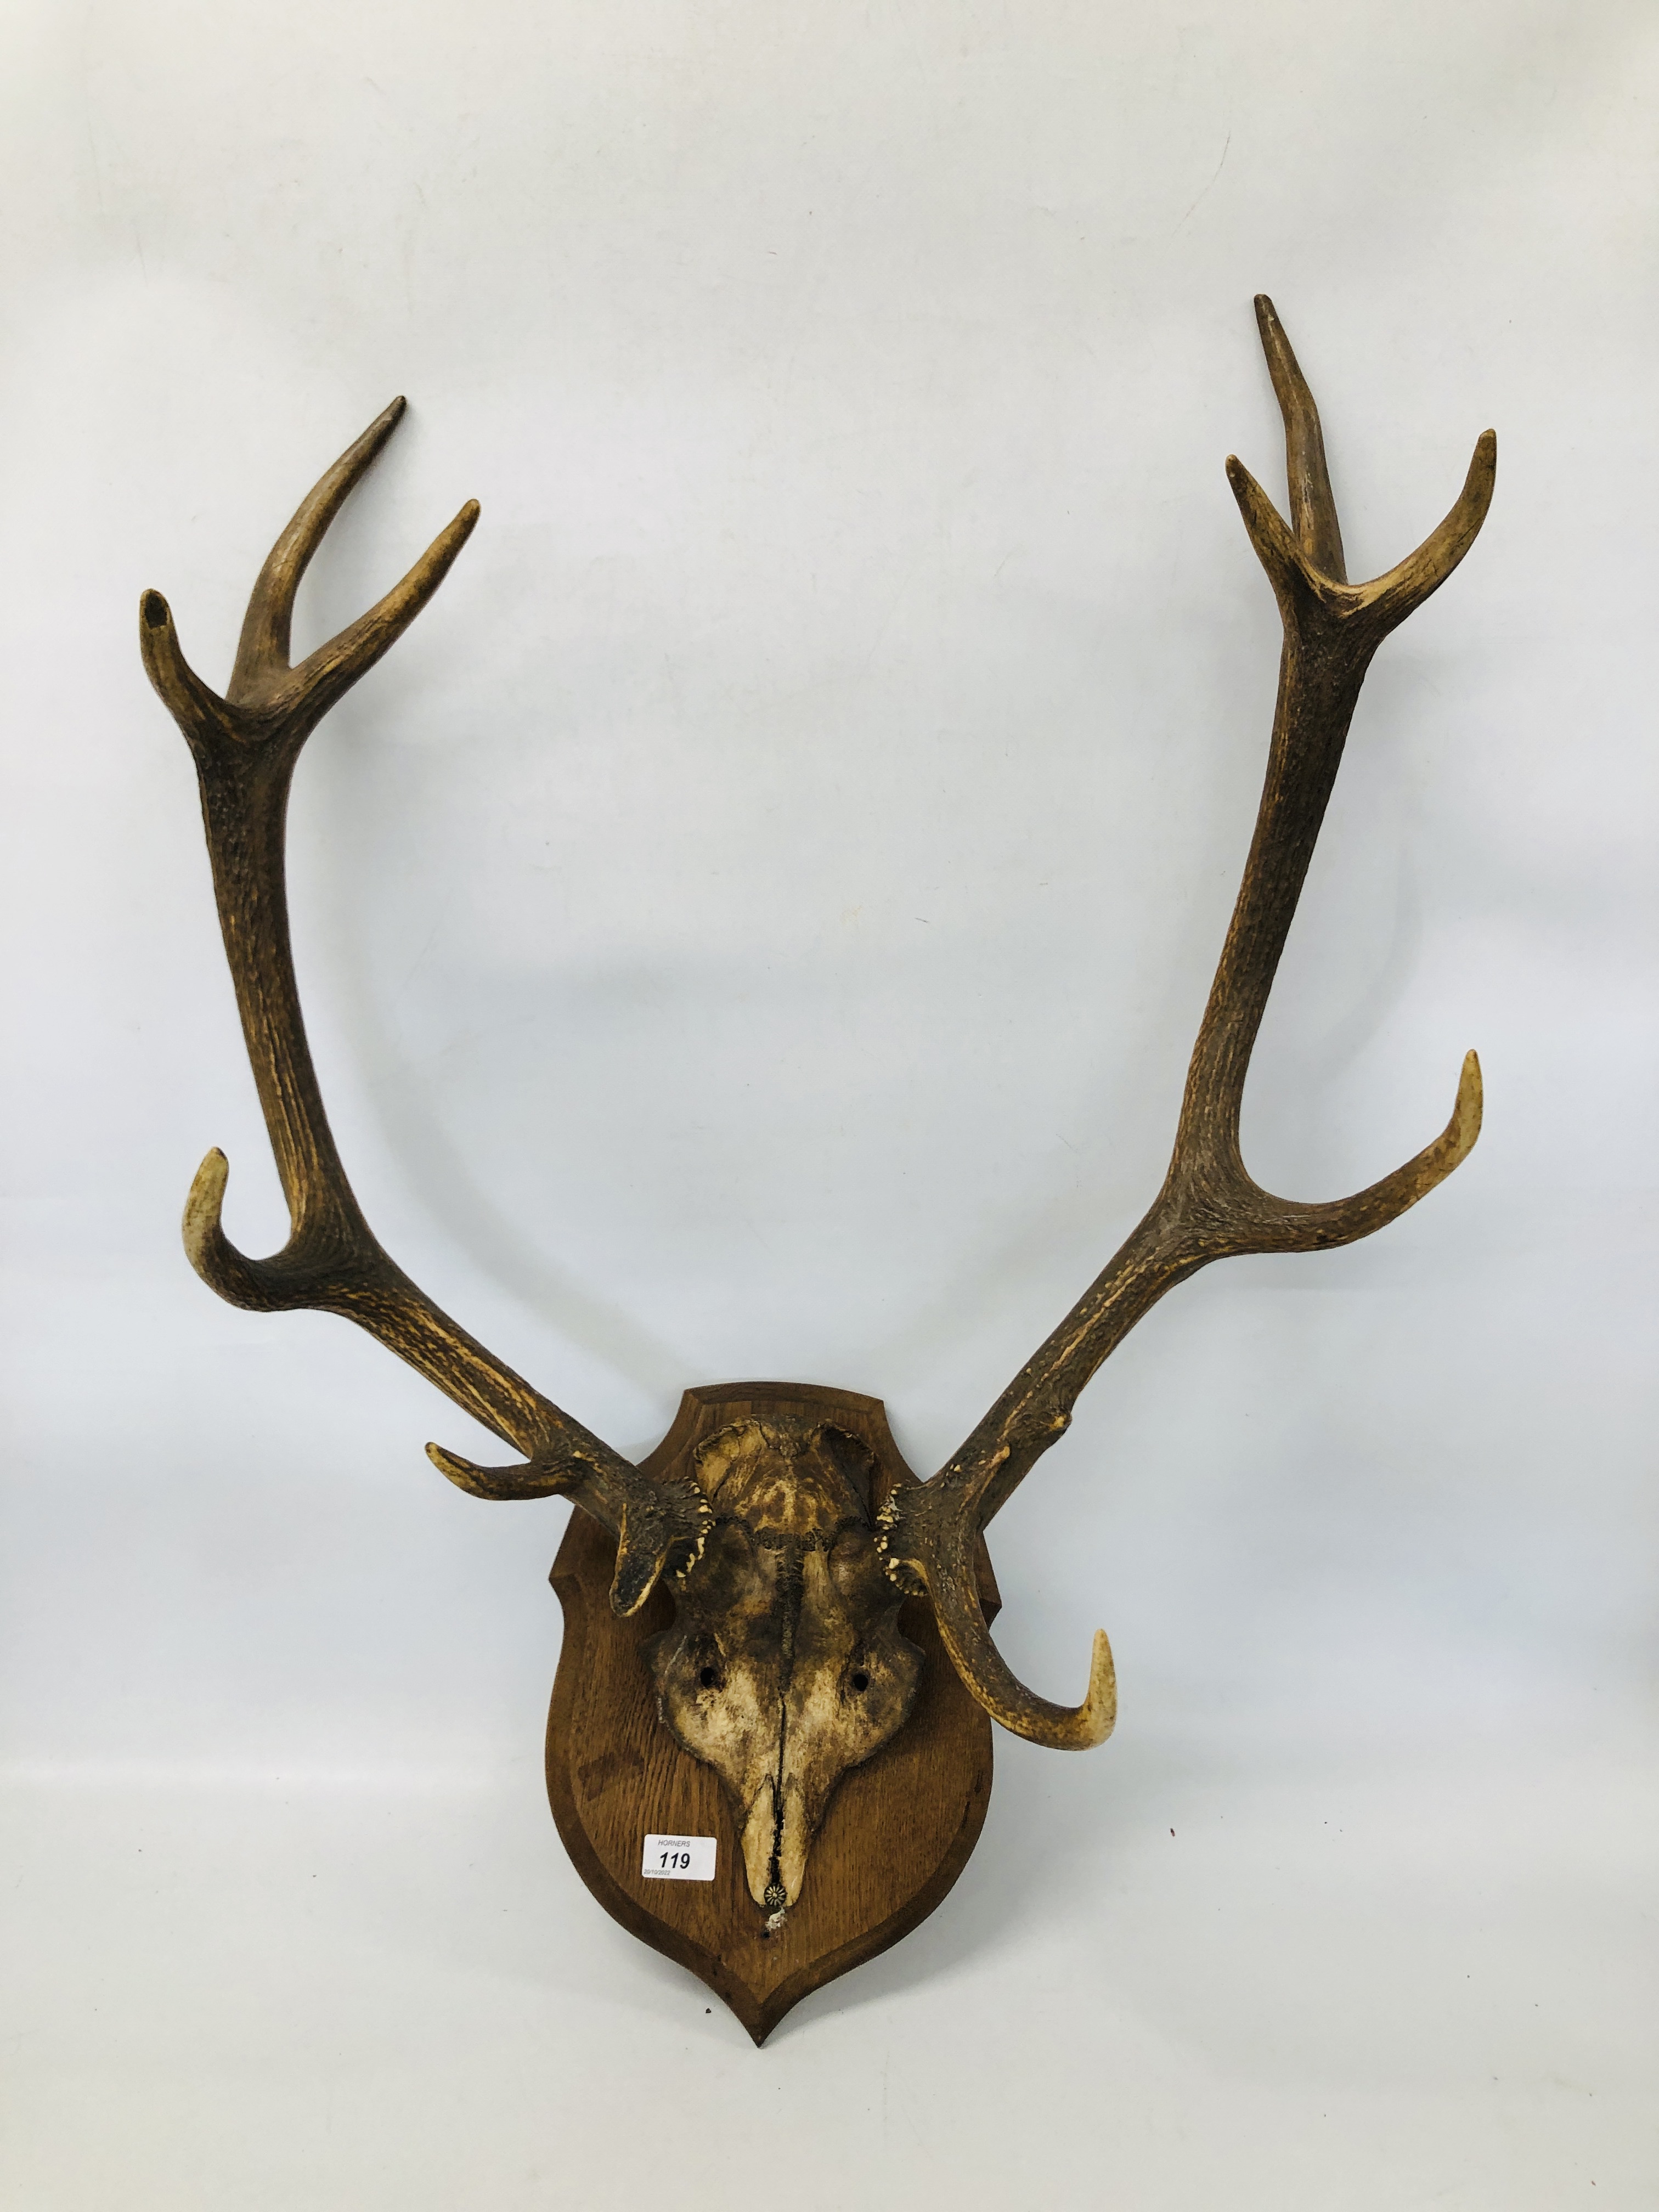 AN ELEVEN POINT RED DEER ANTLERS MOUNTED ON OAK SHIELD WALL PLAQUE.